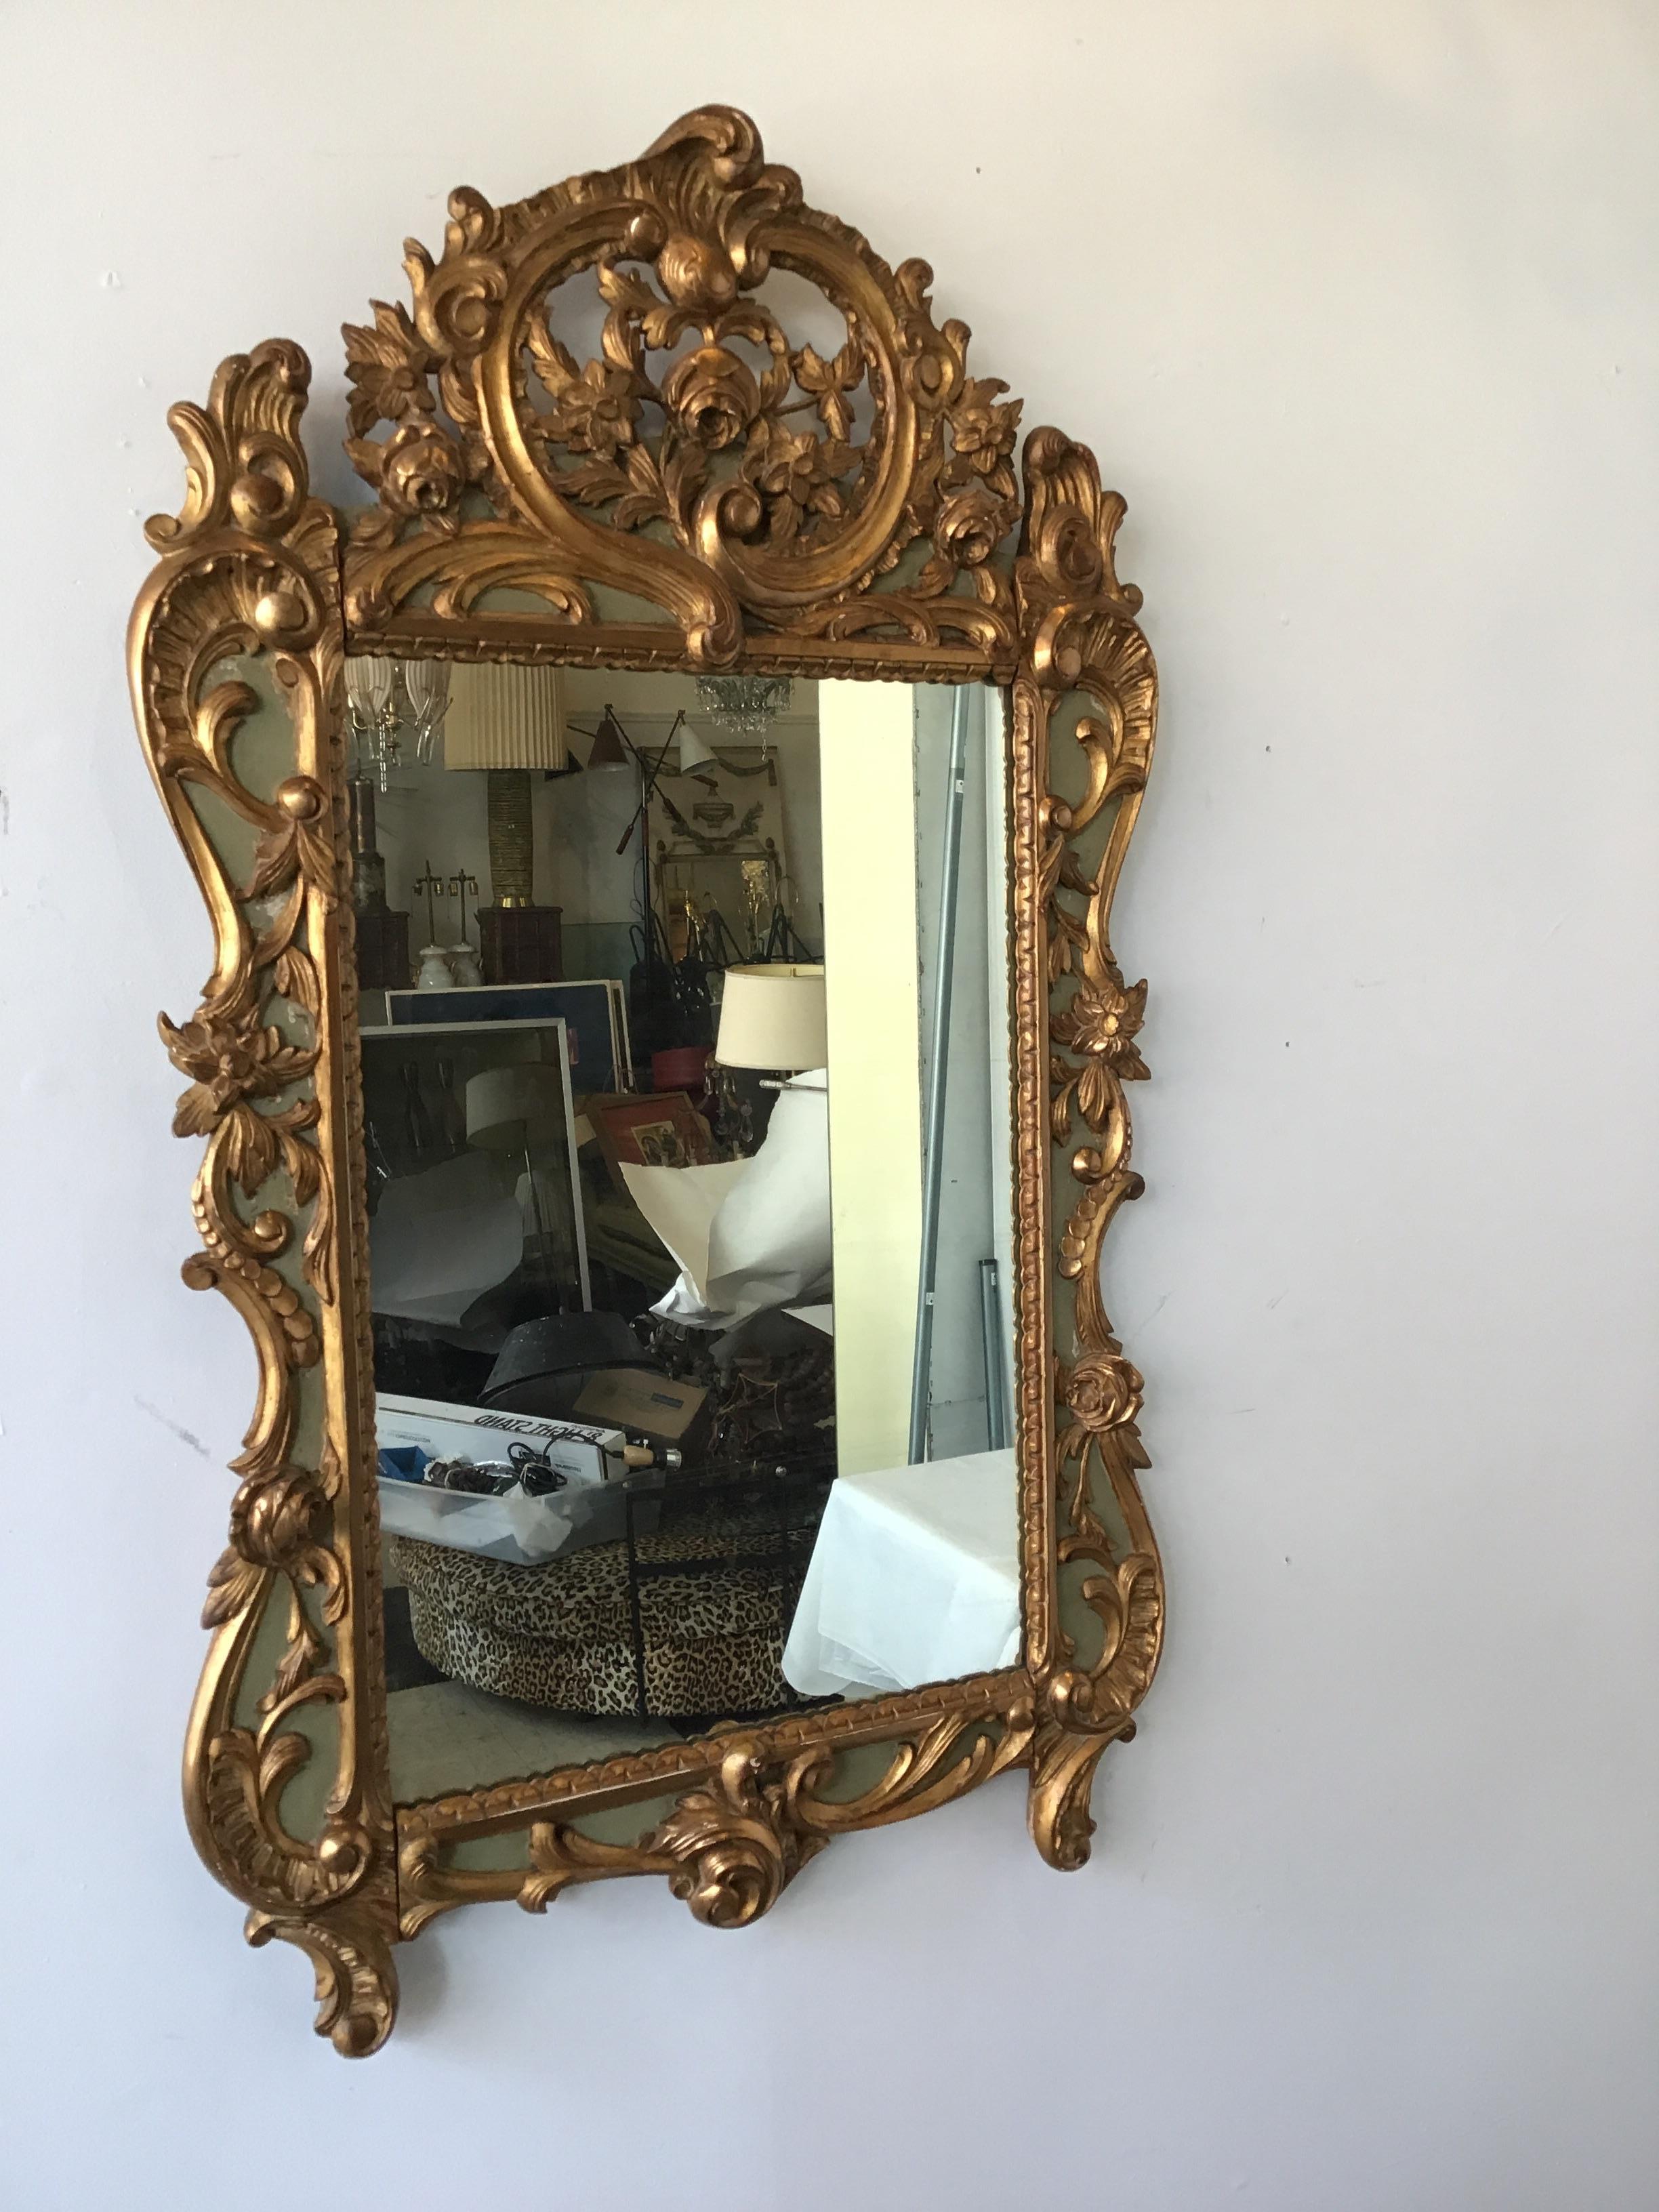 1870s French carved wood gilt mirror.